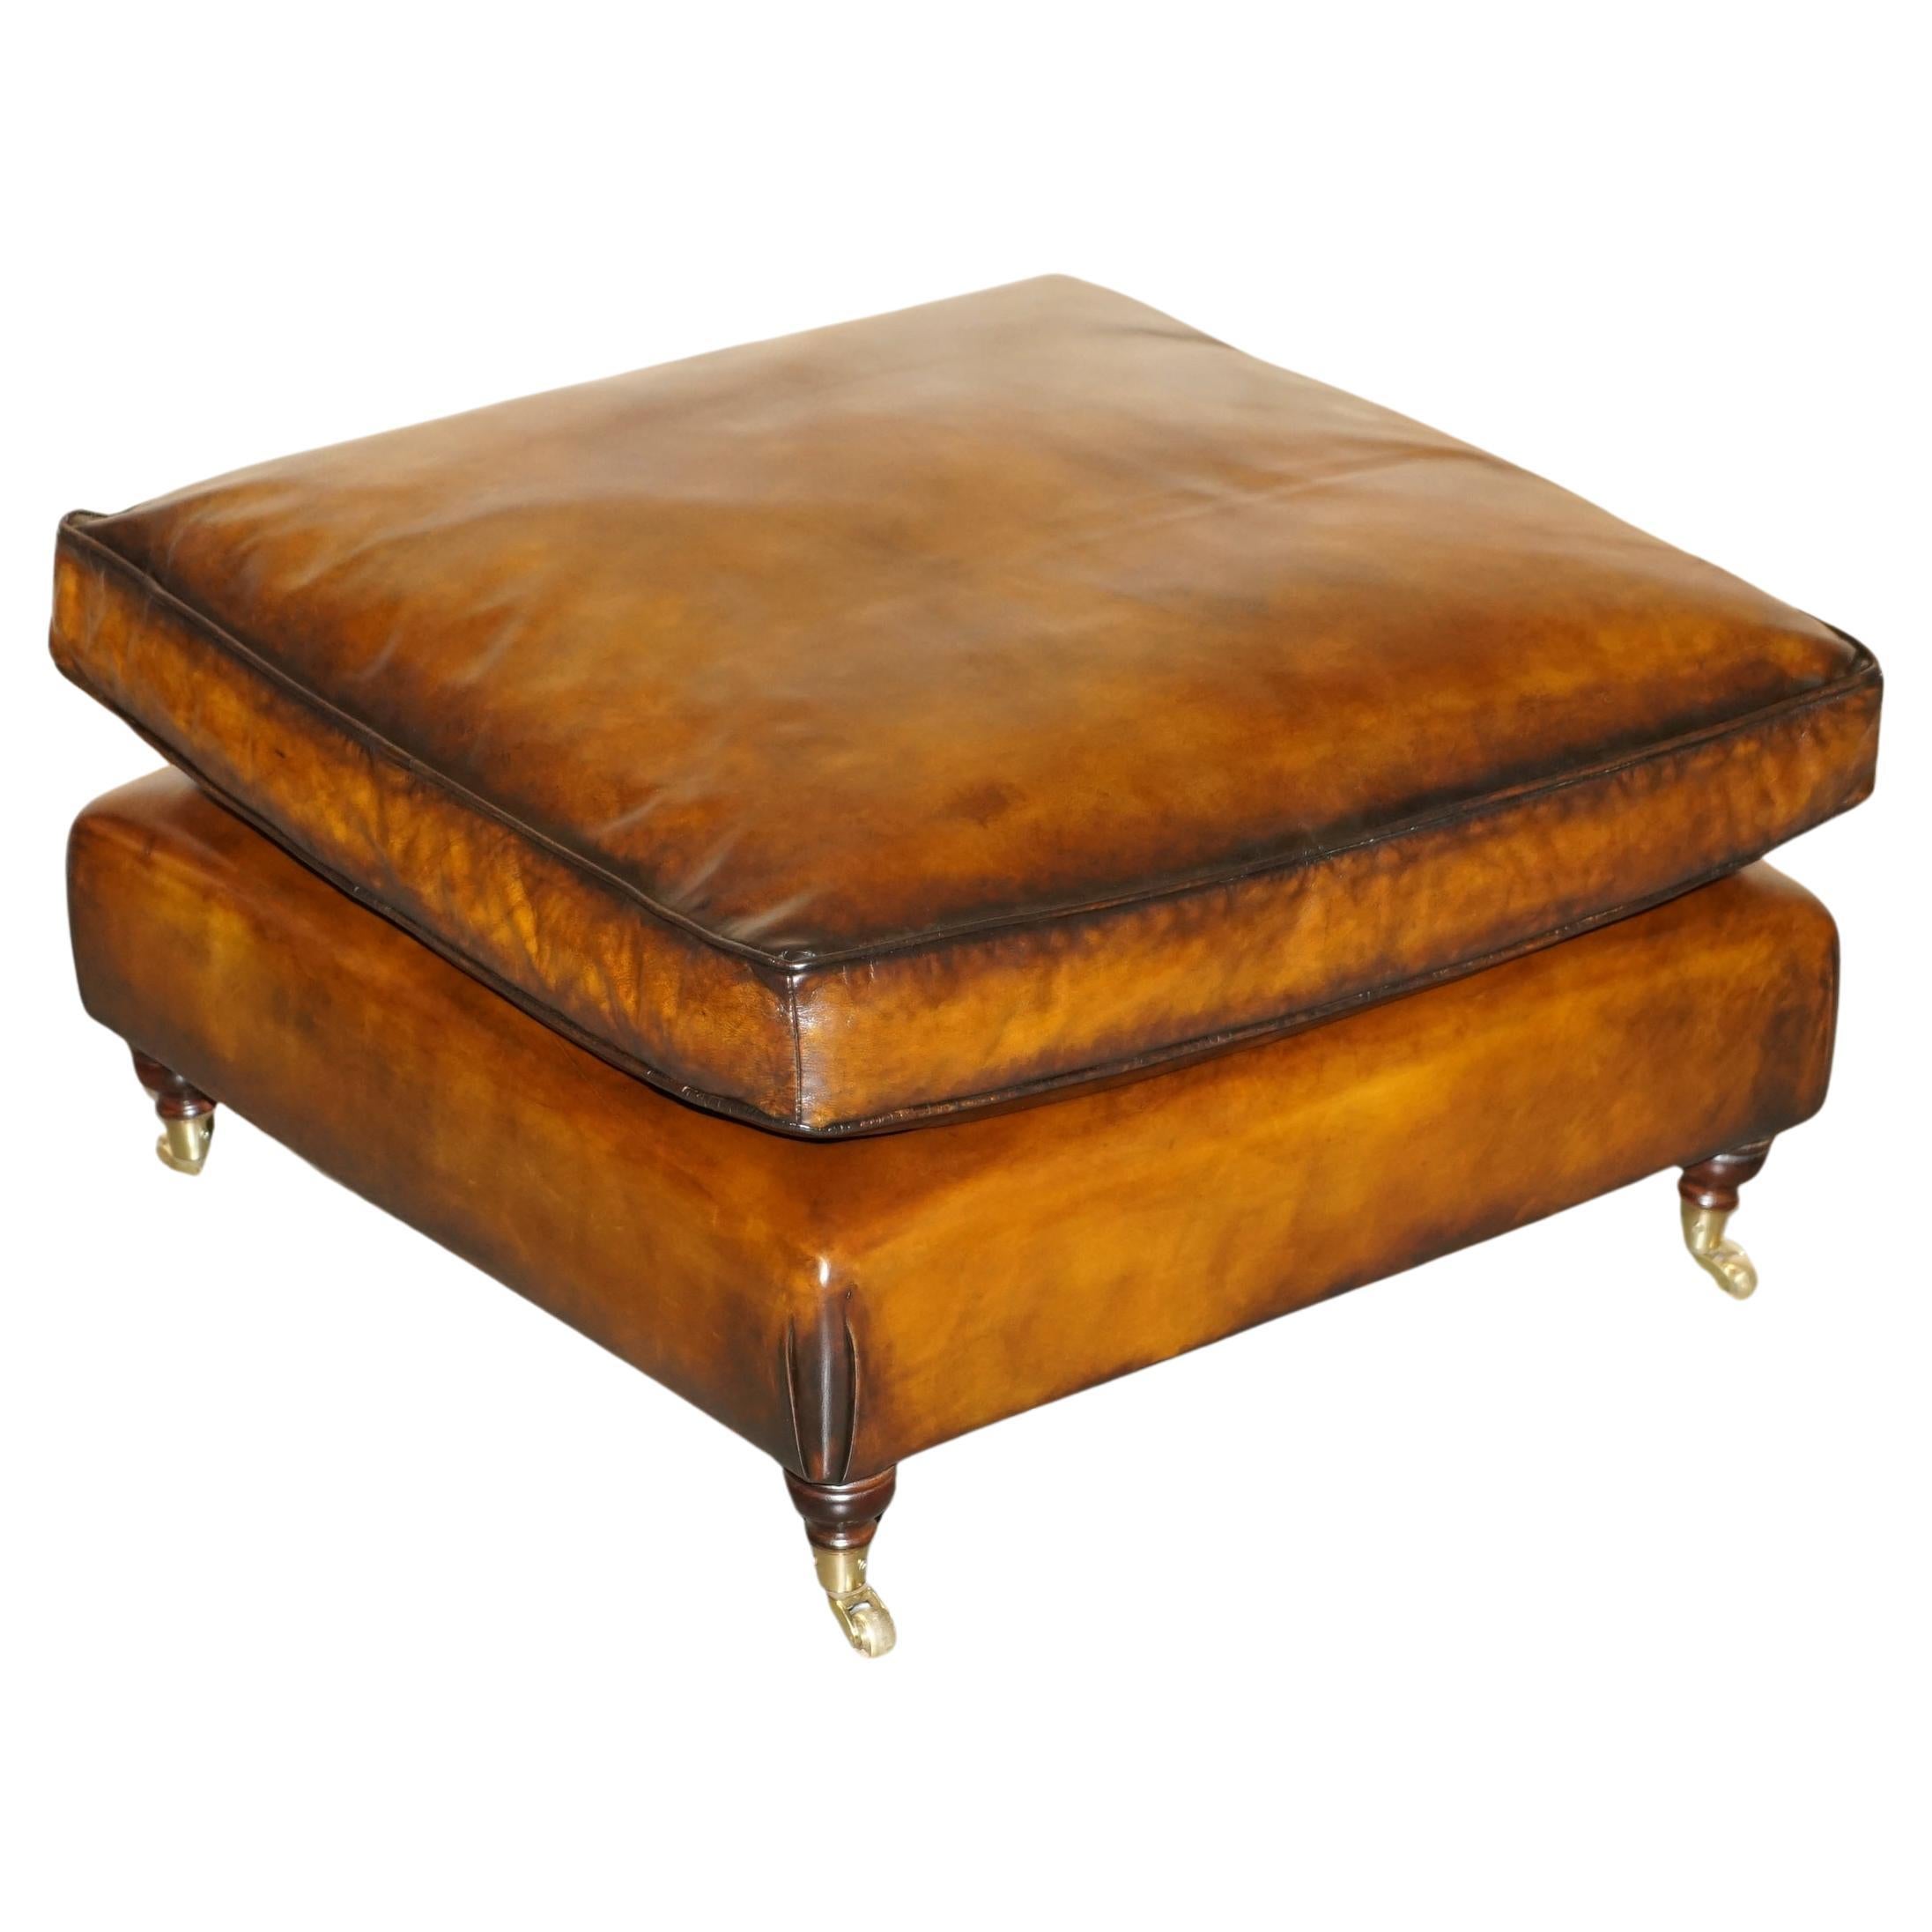 EXTRA LARGE FEATHER SEAT RESTORED BROWN LEATHER OTTOMAN FOOTSTOOL PART OF SUiTE For Sale